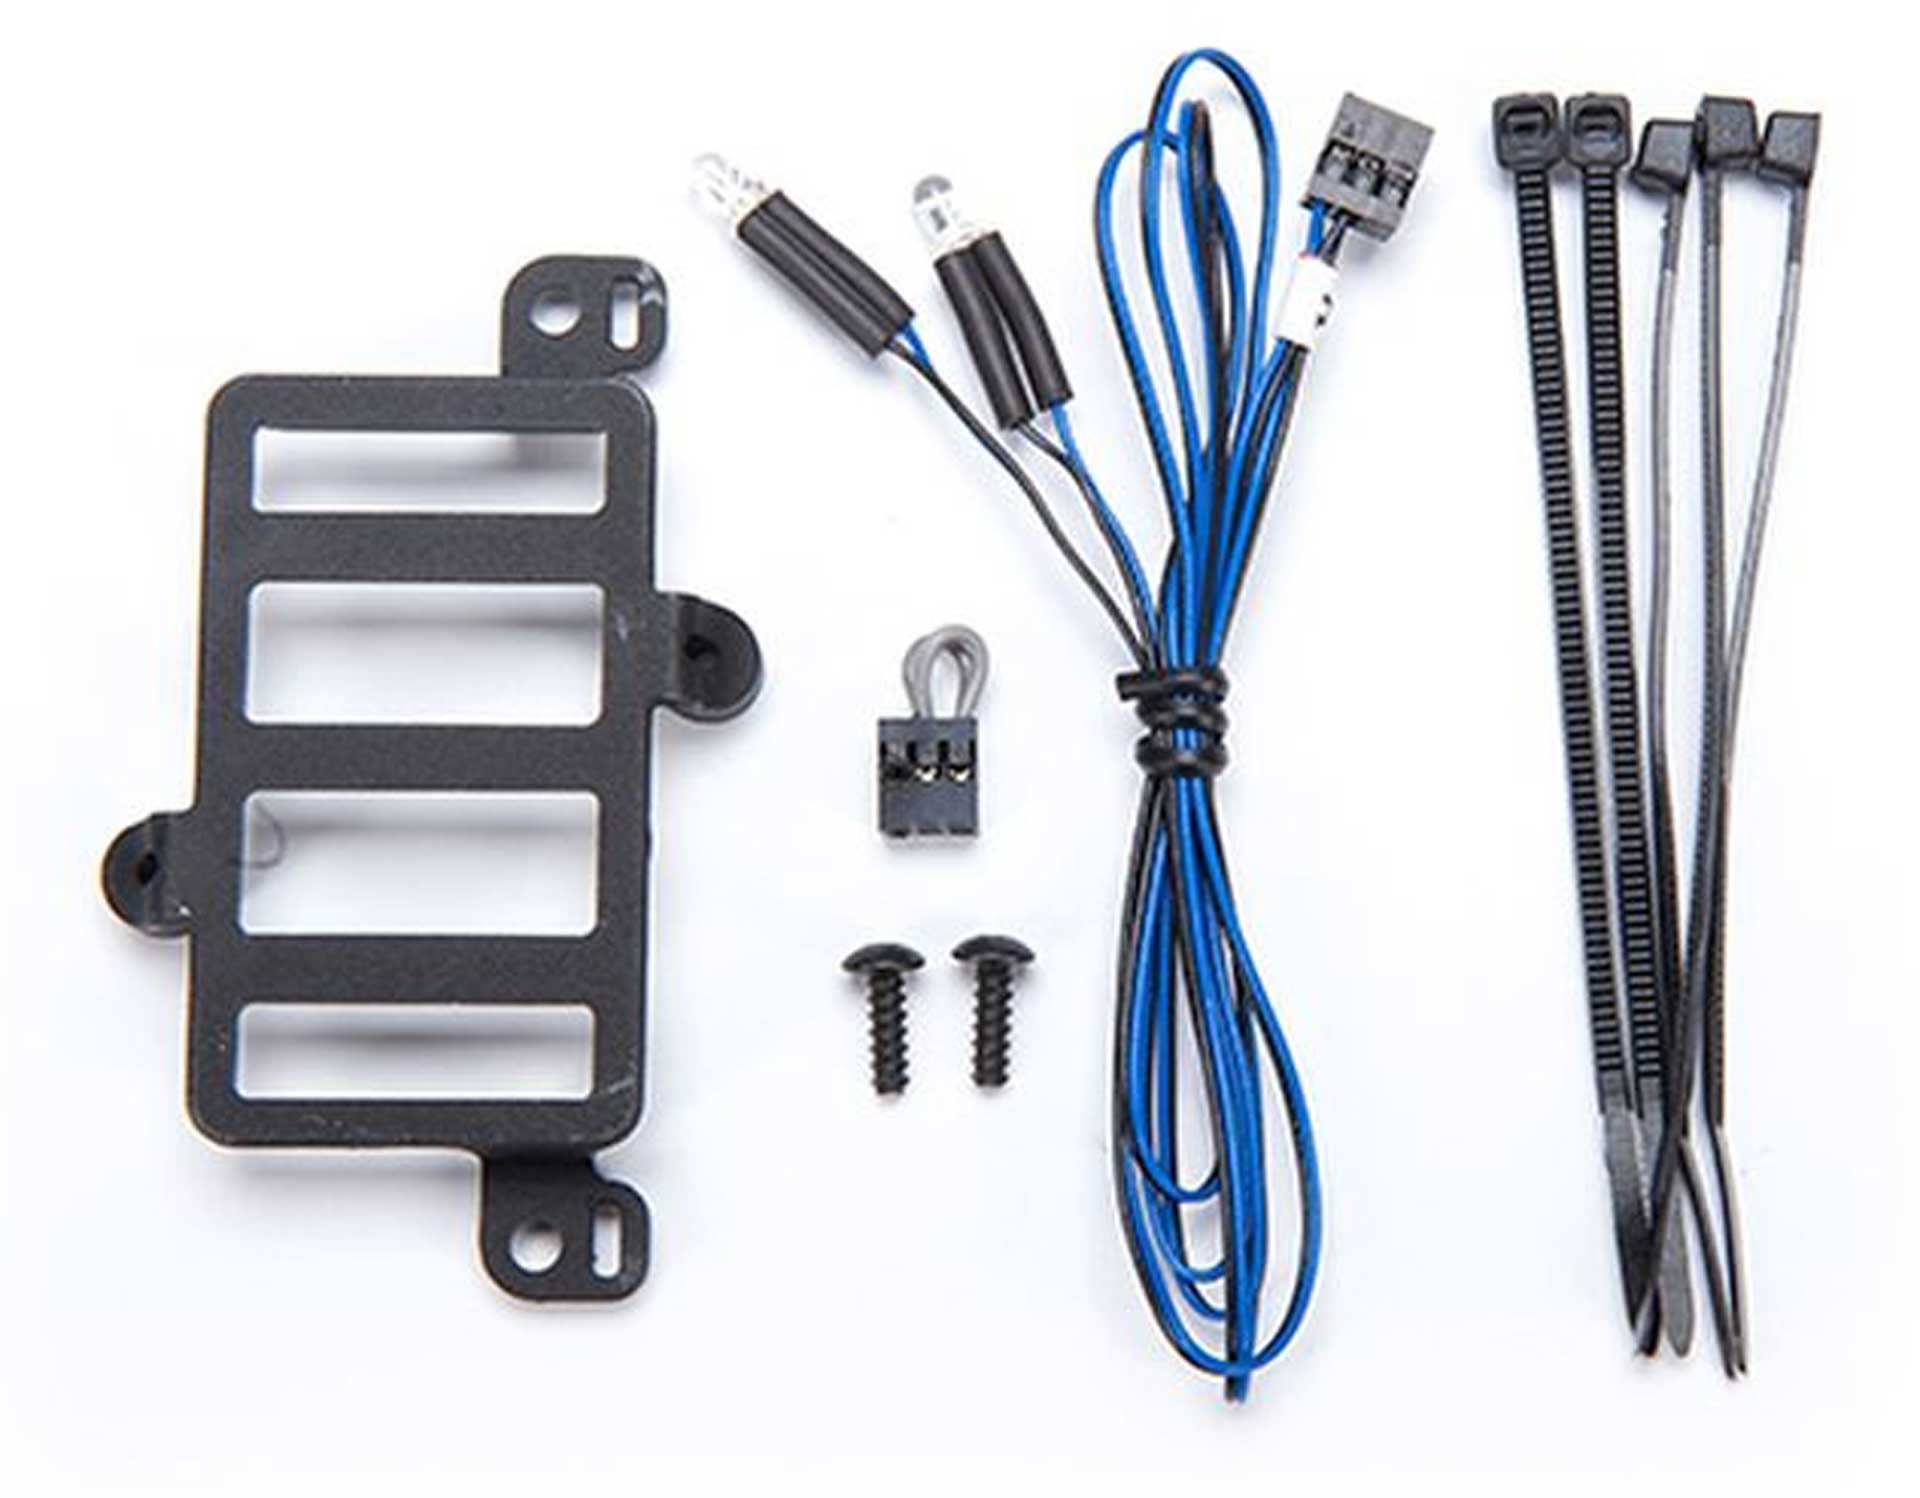 TRAXXAS PRO SCALE ADVANCED LIGHT-CONTROL-SYSTEM INS INSTALLATION KIT FOR TRX-4 1979 FORD BRONCO